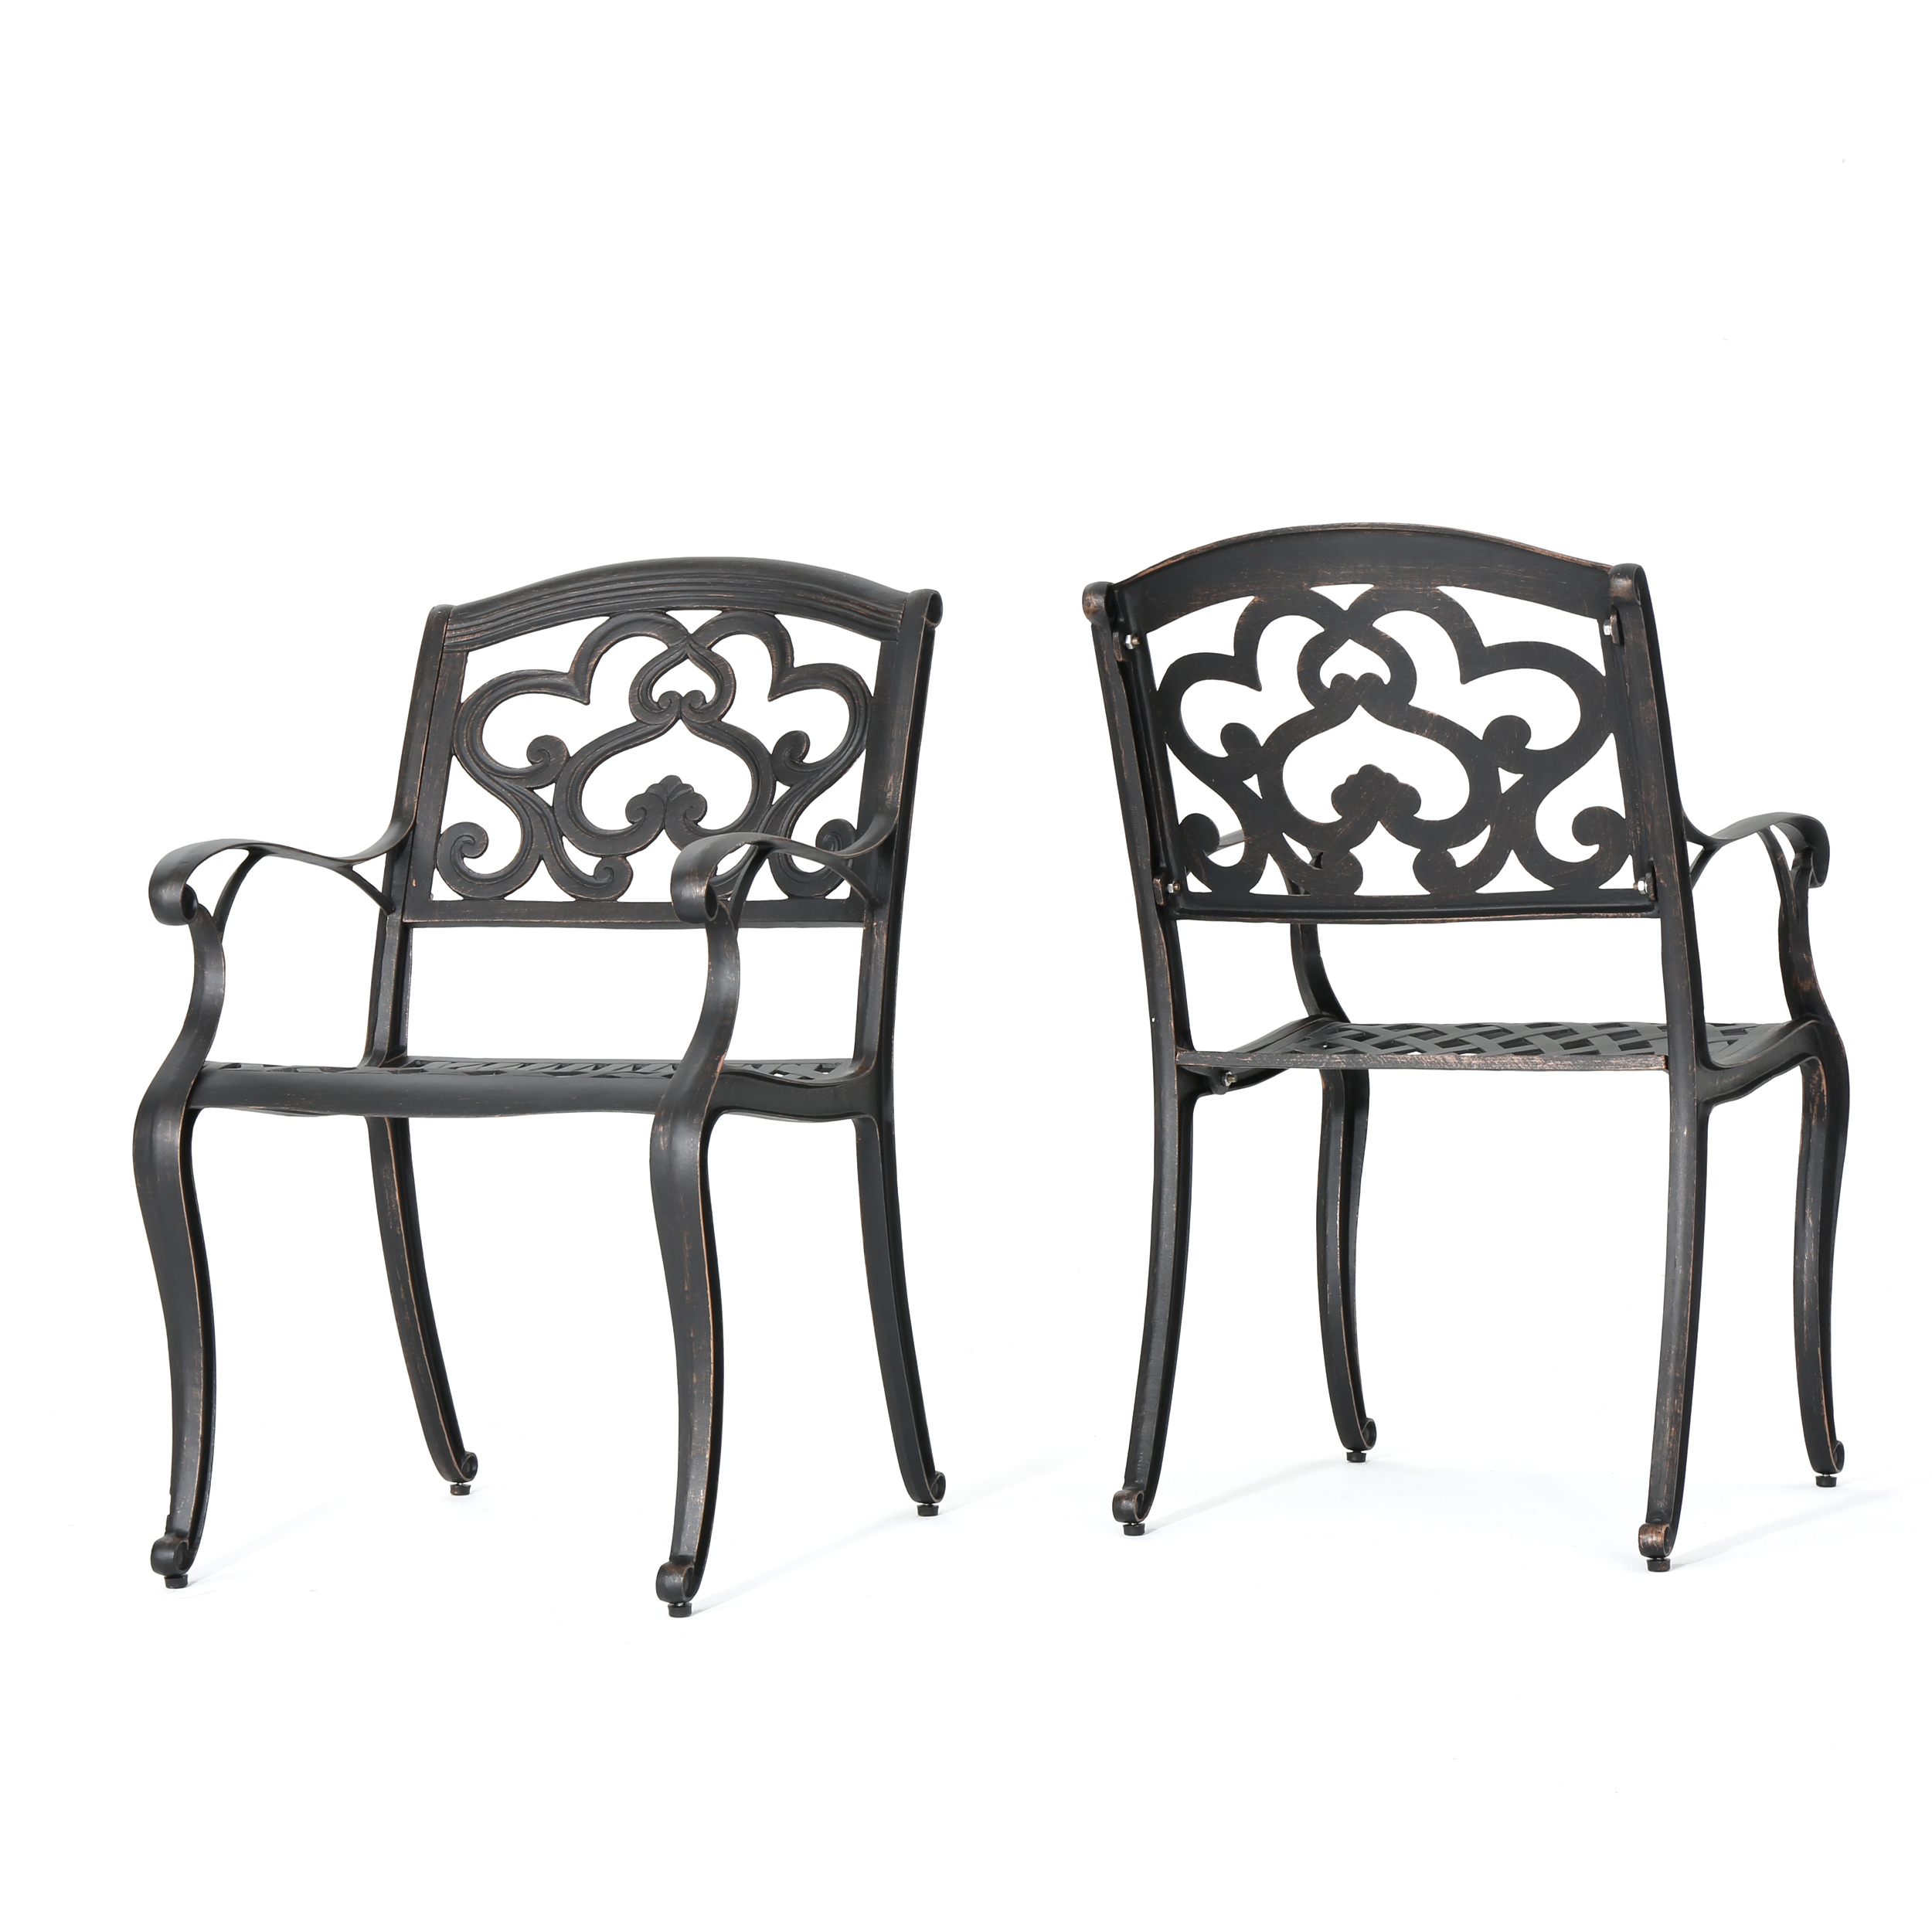 Outdoor Cast Aluminum Dining Chairs (Set Of 2), Shiny Copper